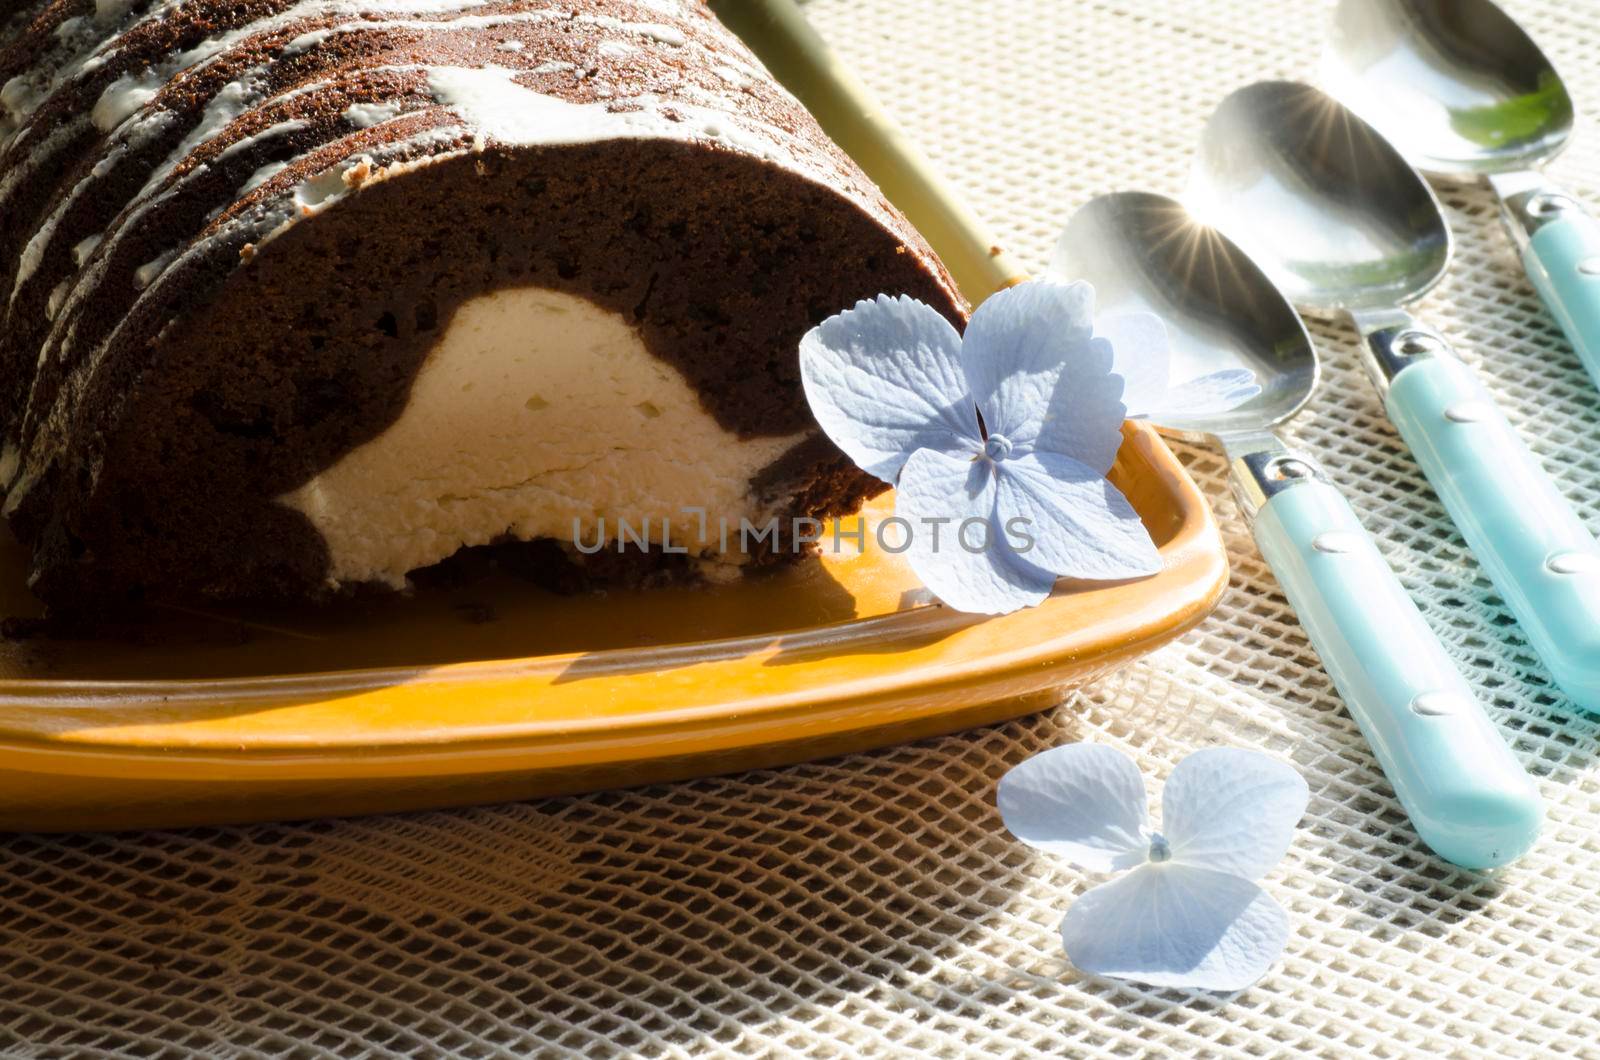 Chocolate cake with mint and blueberries on rectangular plate. From series "Chocolate cake"